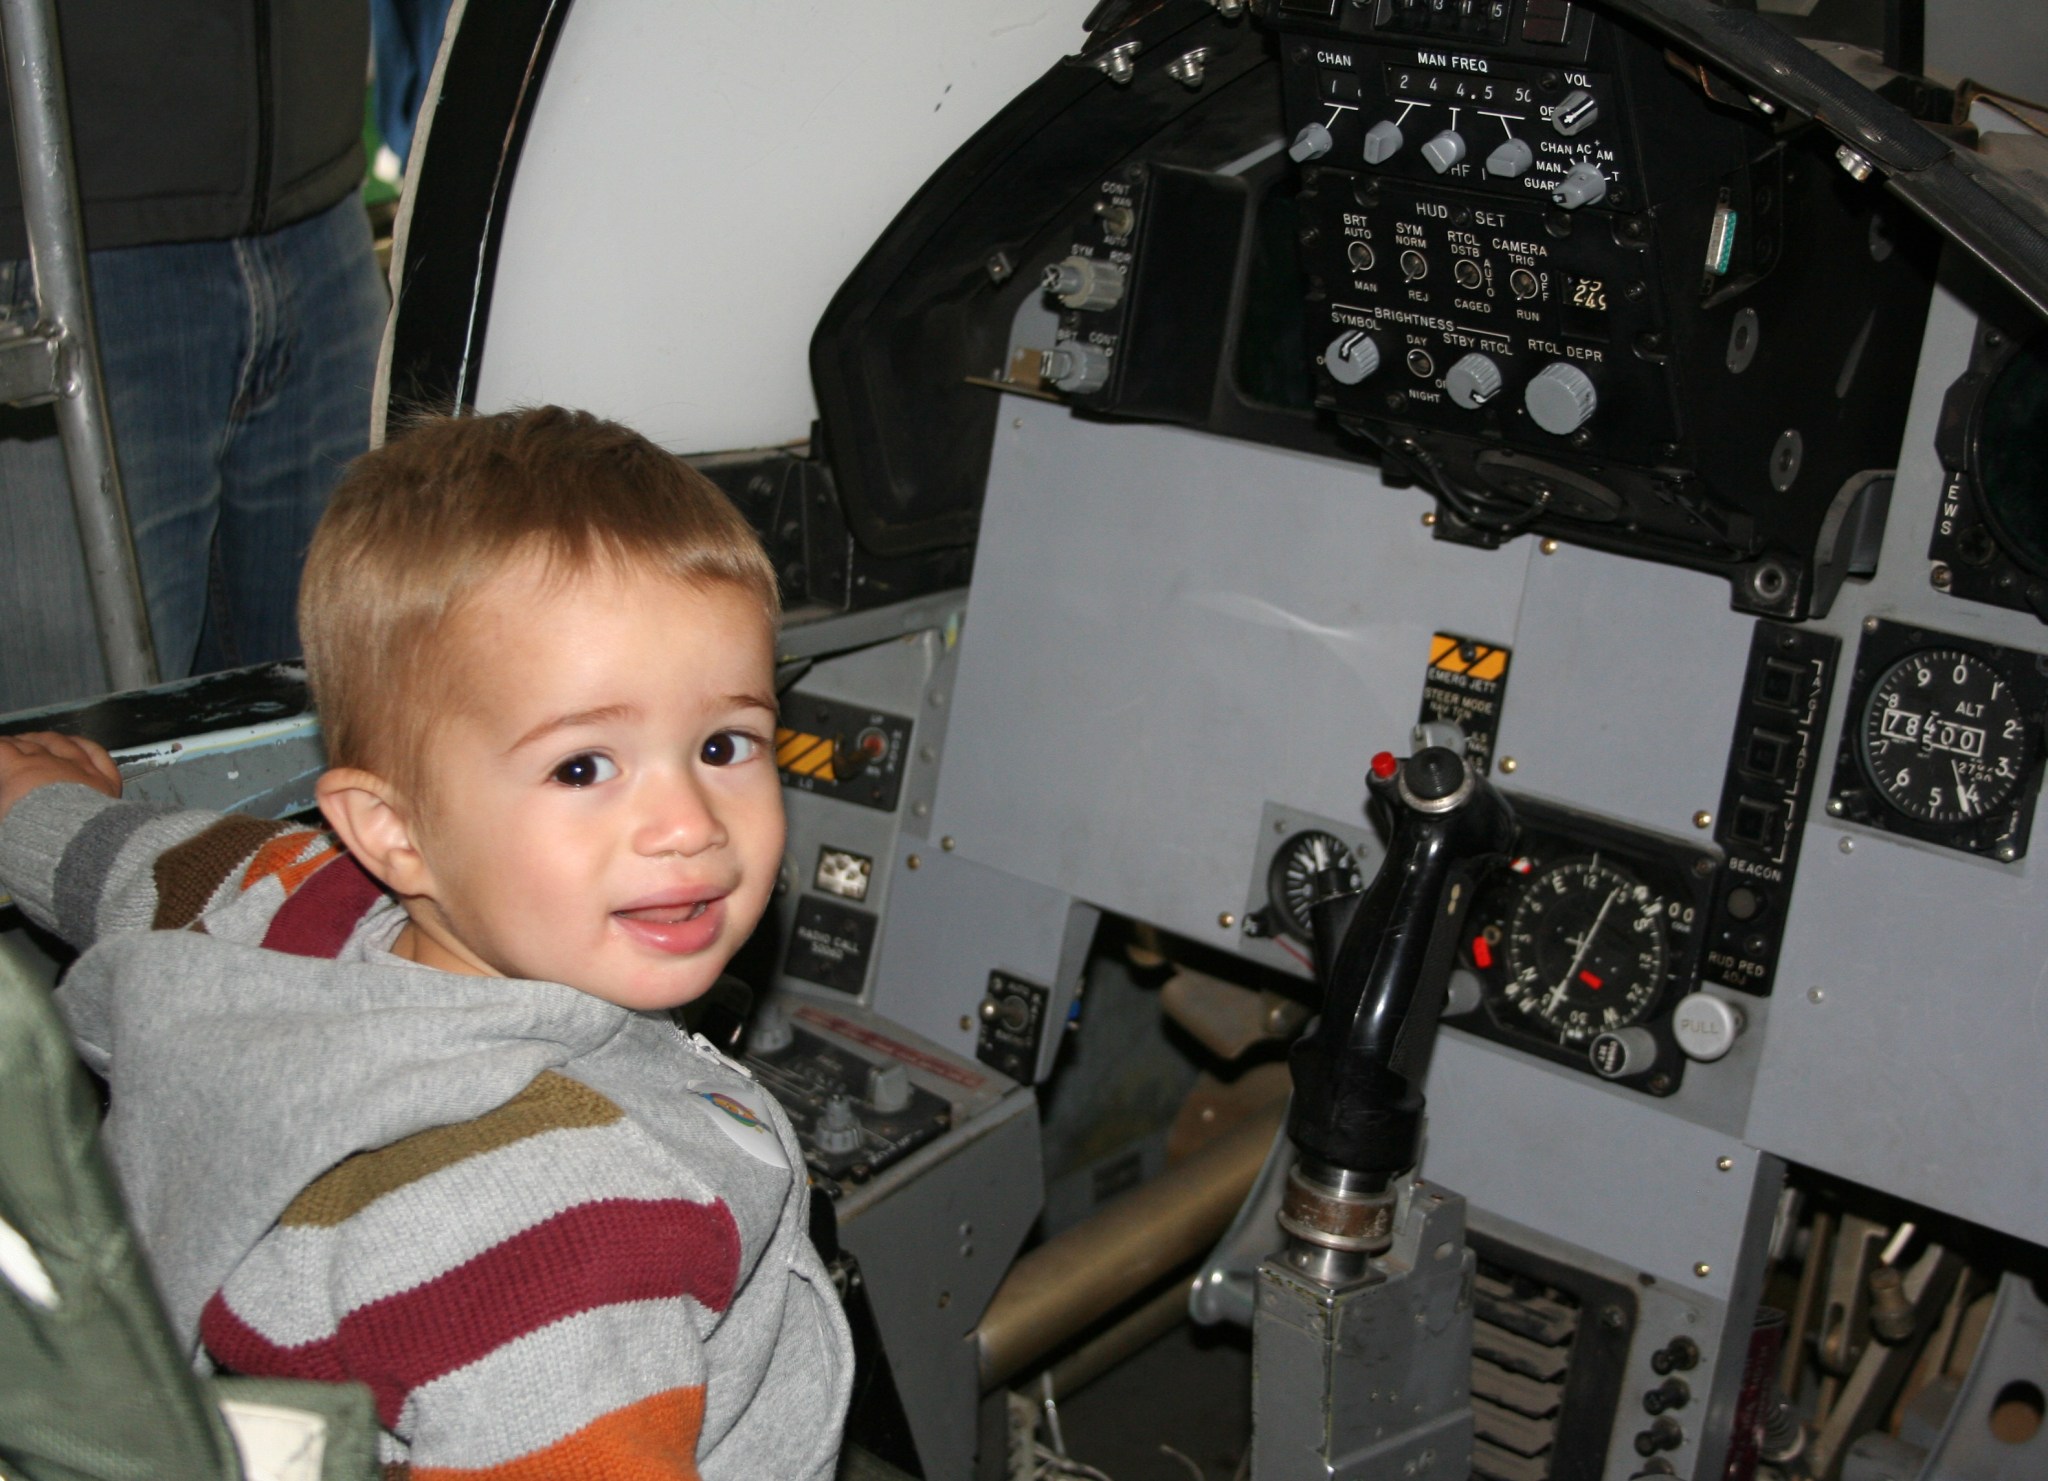 18-month-old Jude Diaz learns what it’s like sit in an F-15 cockpit simulator.